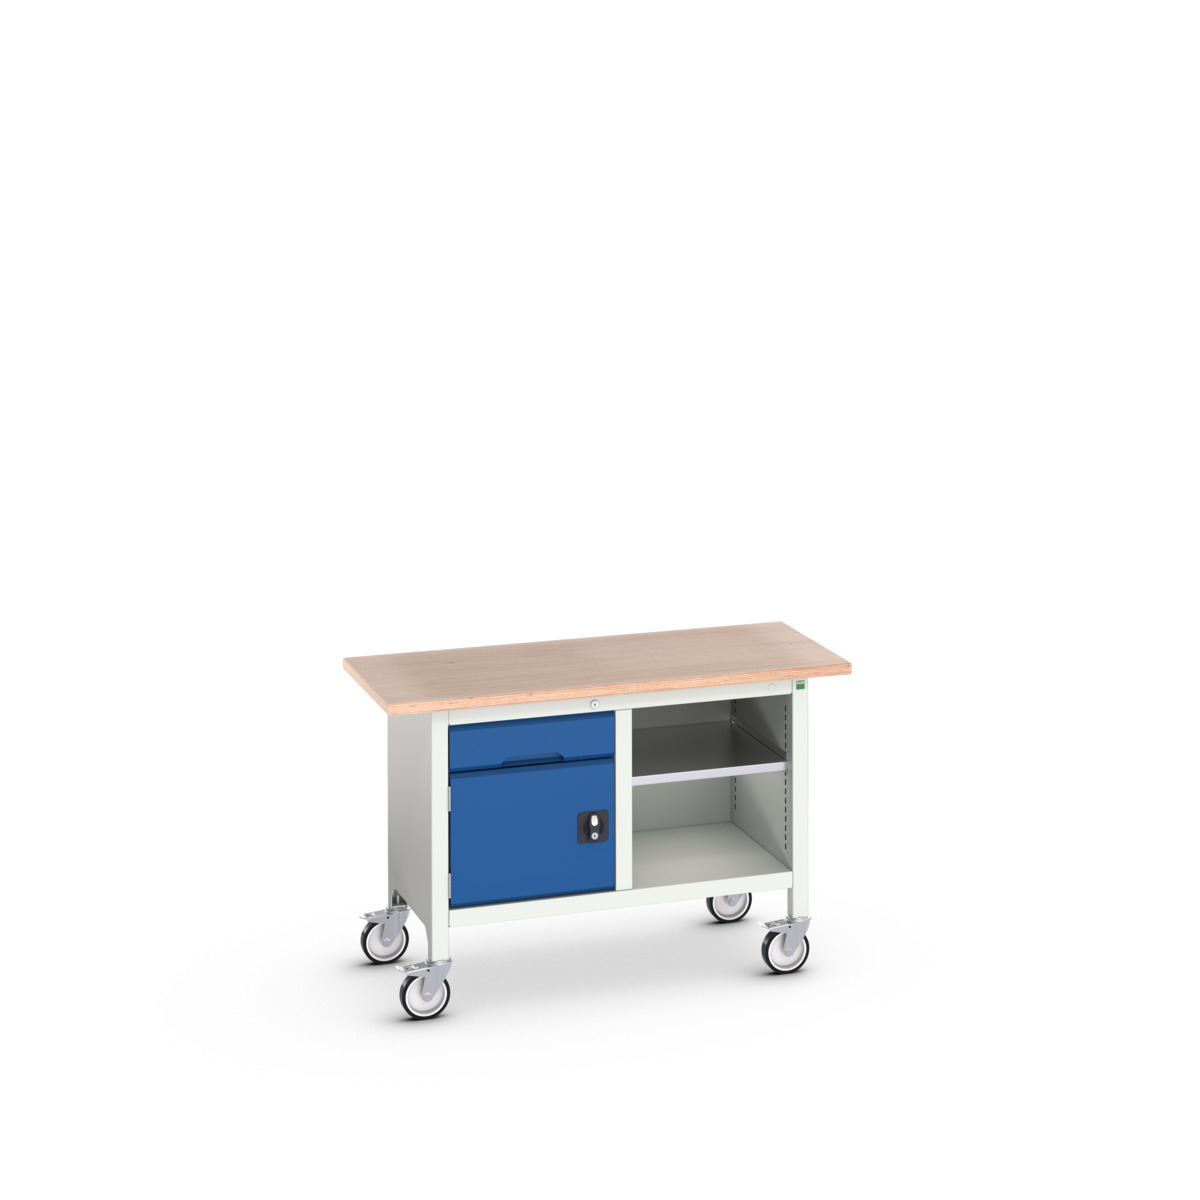 16923200.11 - verso mobile storage bench (mpx)